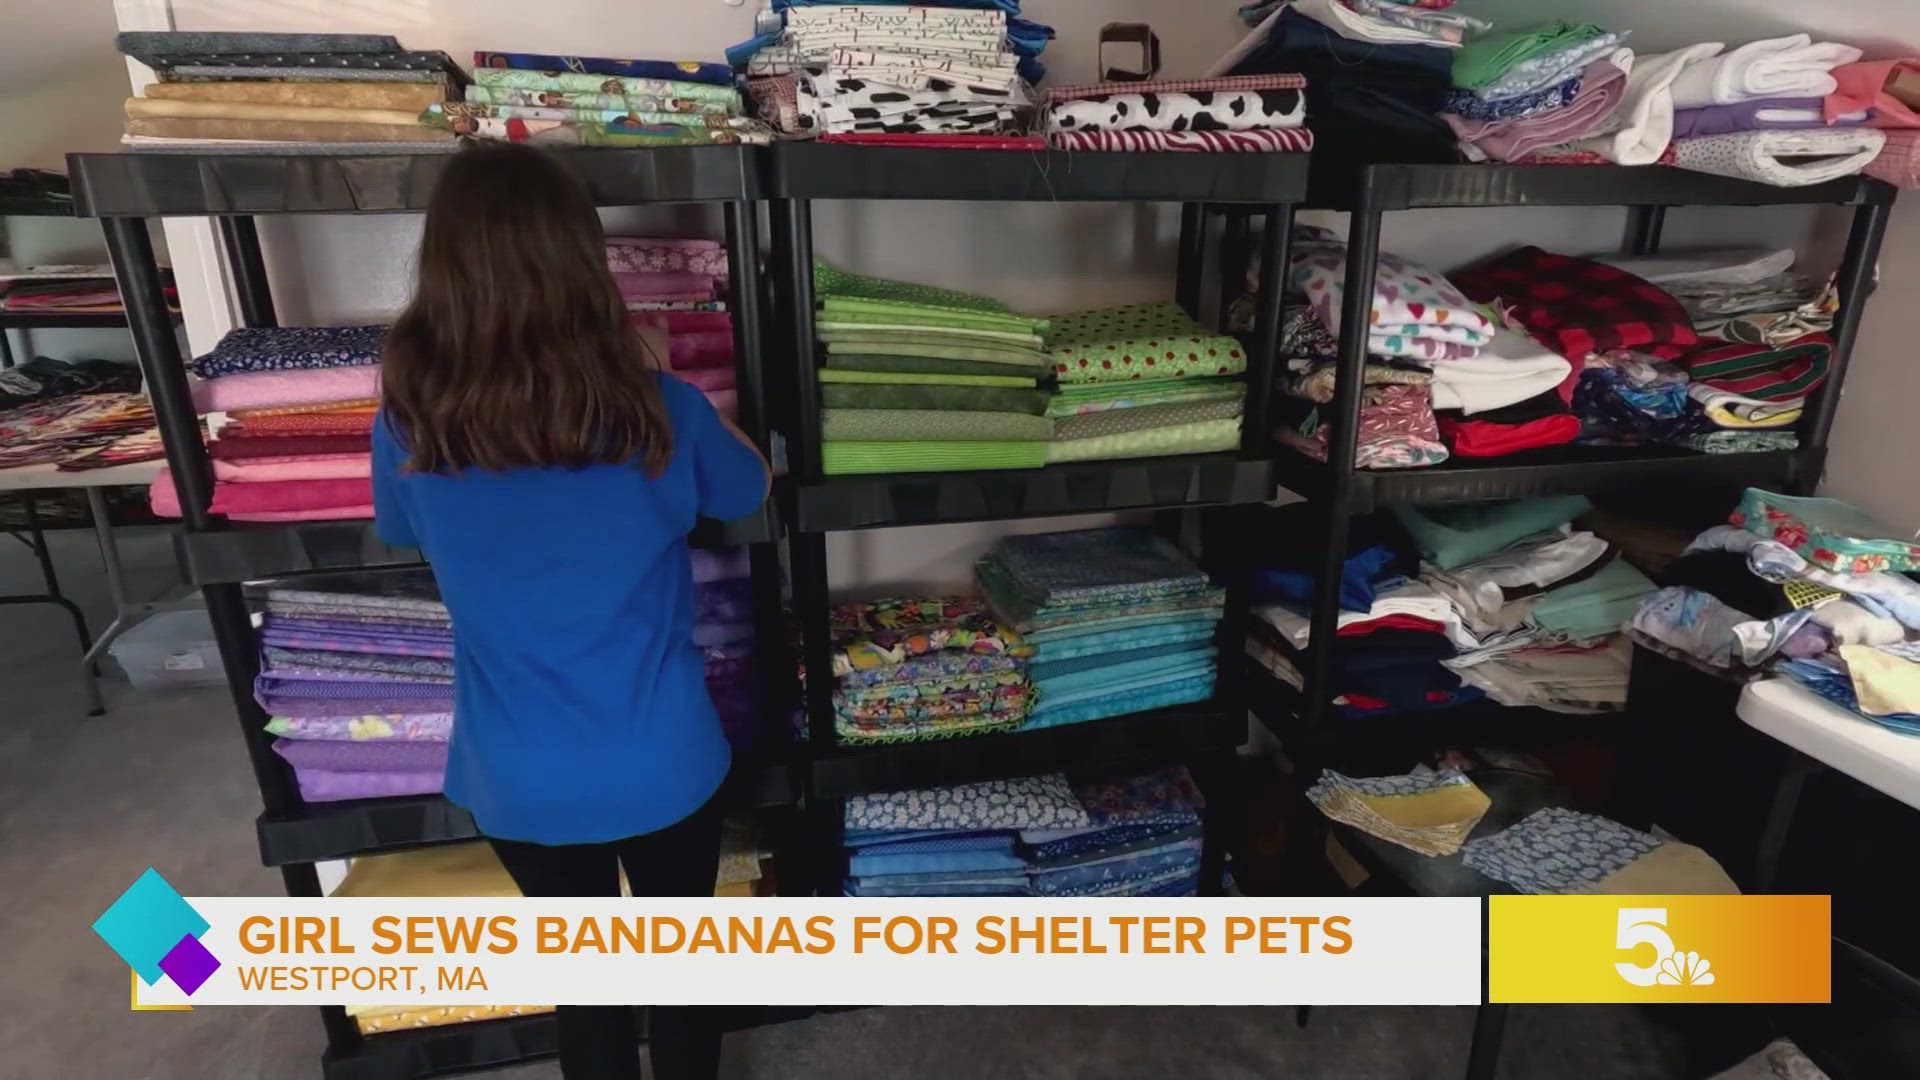 11-year-old Malia Martinez spends majority of her time upstairs in her grandmother's home sewing away. She uses her sewing skills to make bandanas for shelters.